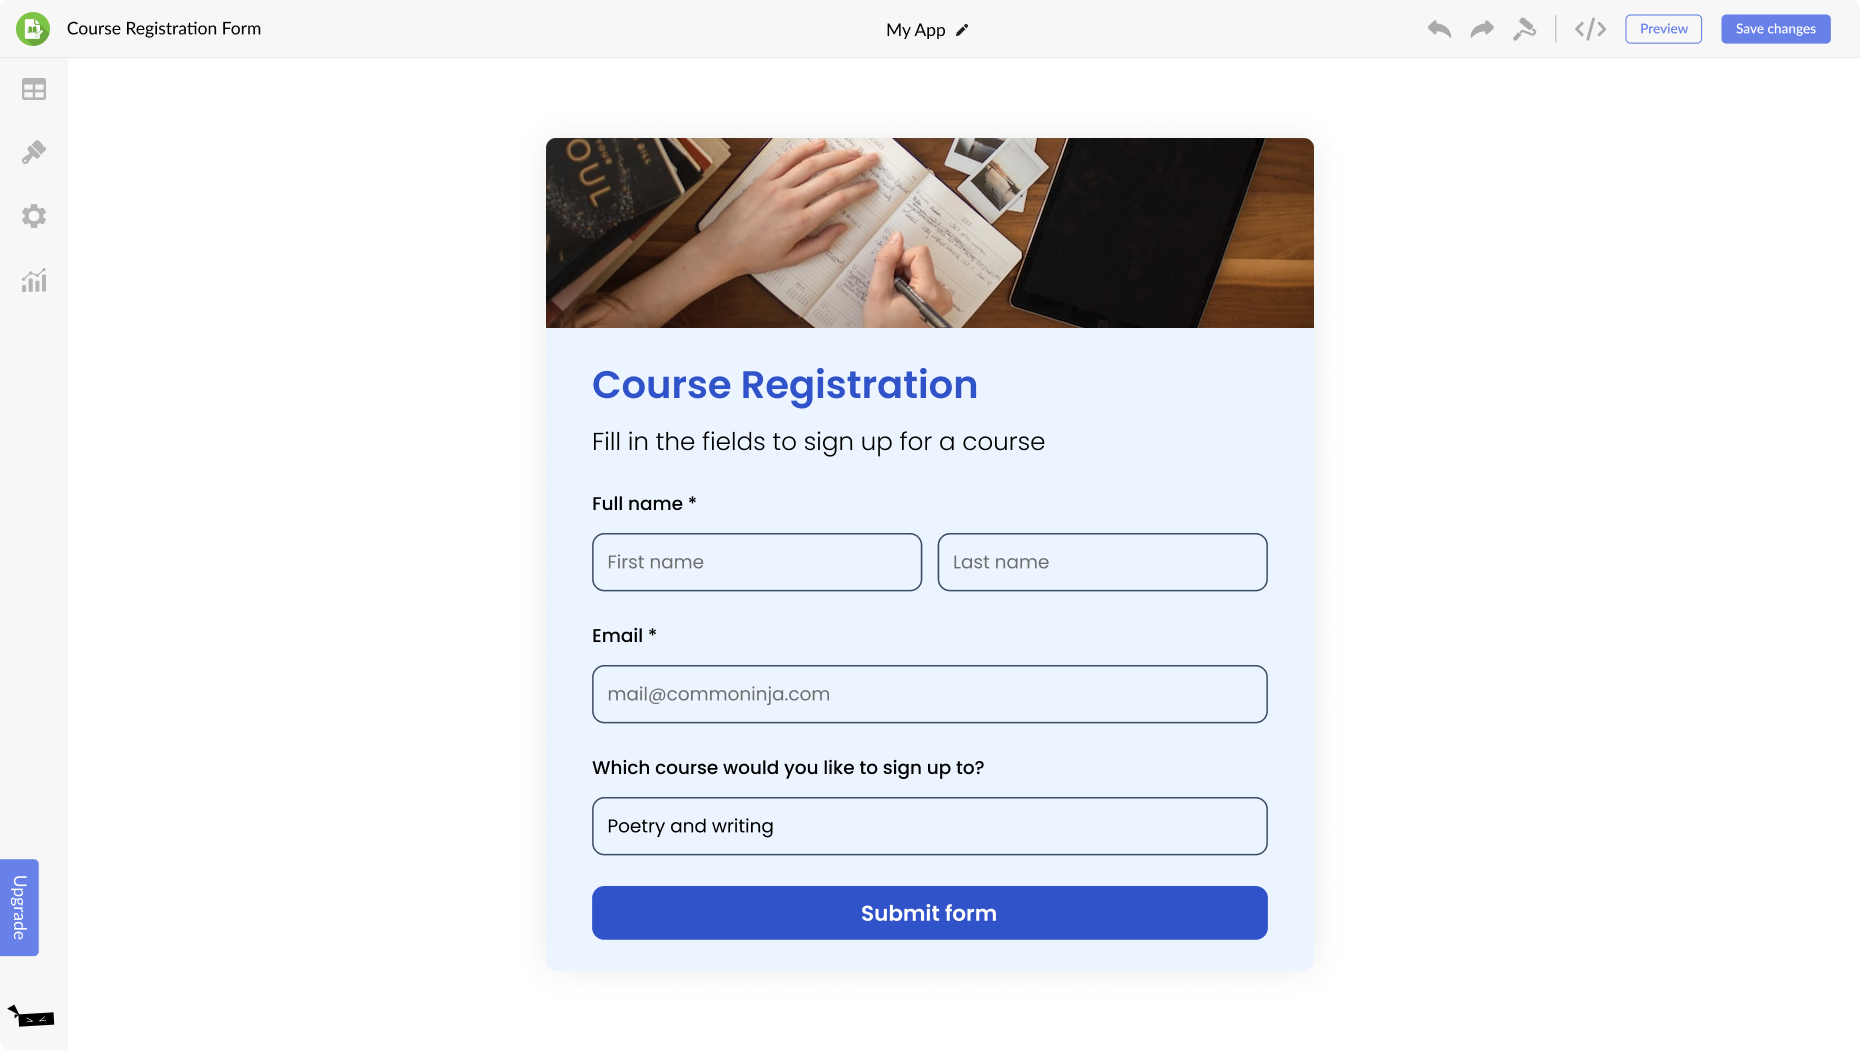 Course Registration Form for ASEKIO